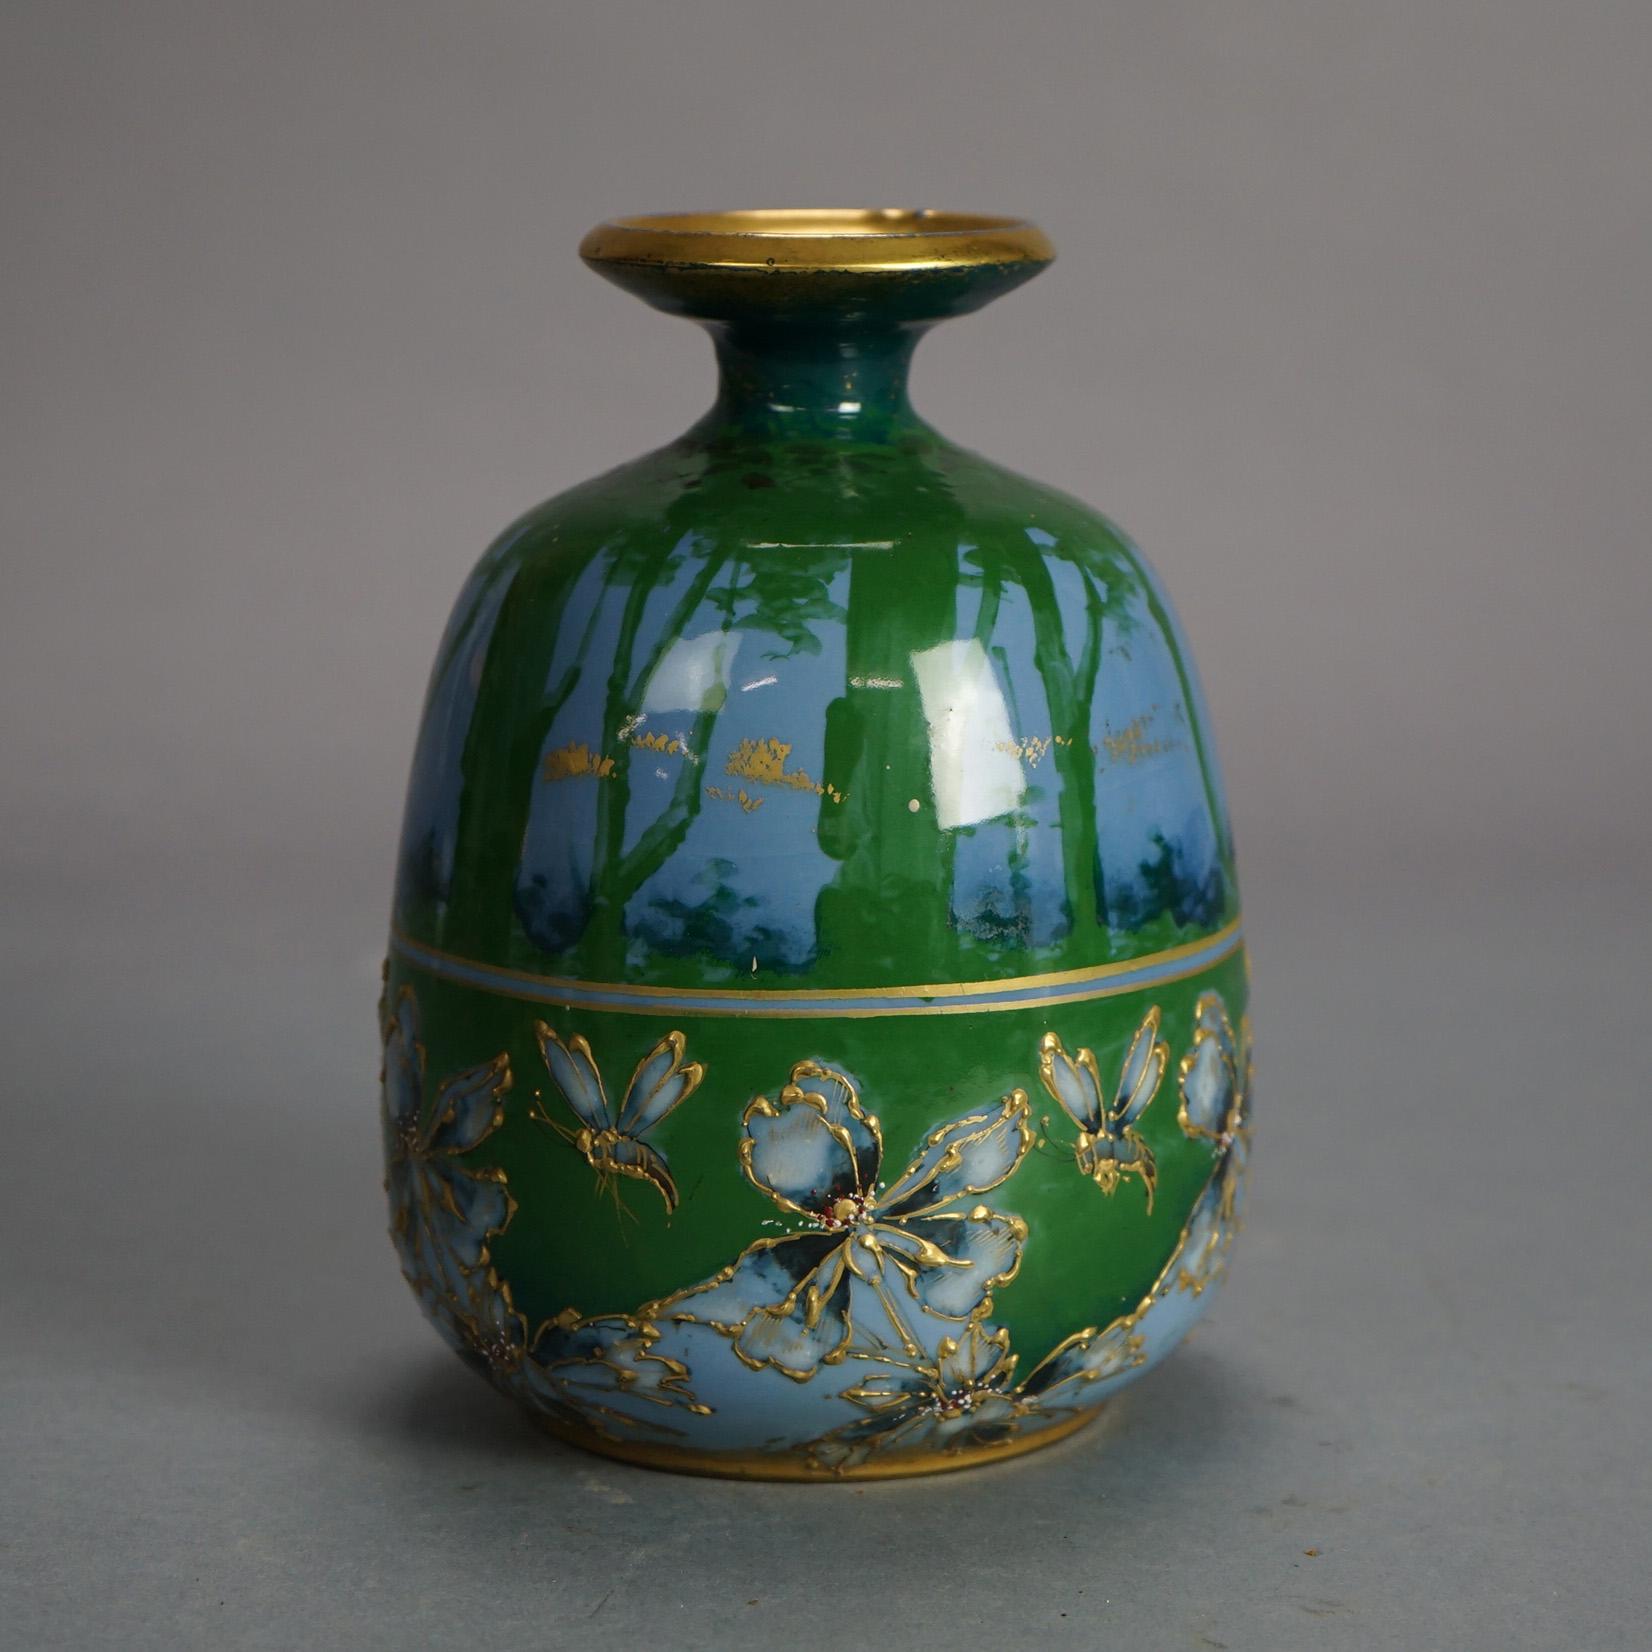 Antique Amphora Teplitz Pottery Vase with Hand Painted Sunrise Wooded Landscape and Gilt Highlights, C1910

Measures - 7.25